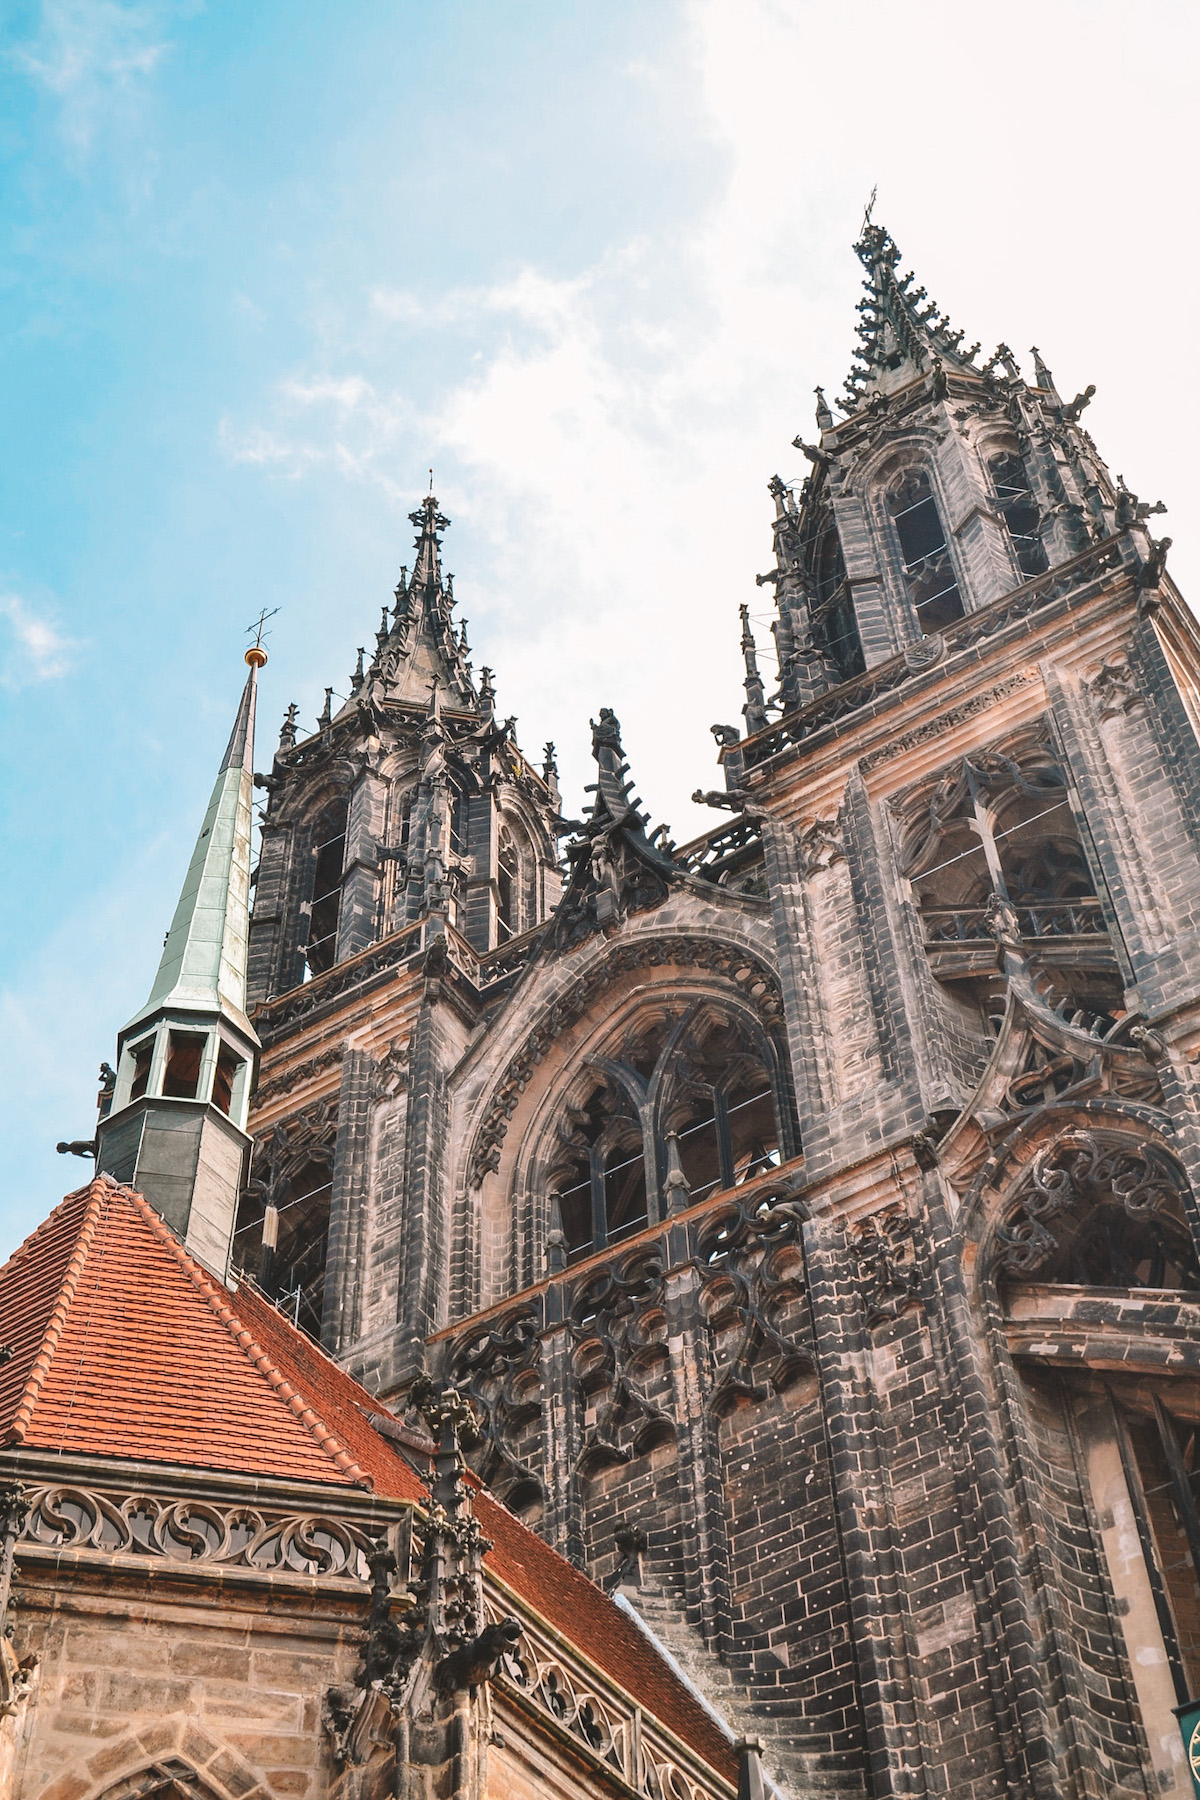 The two spires of Meissen Cathedral